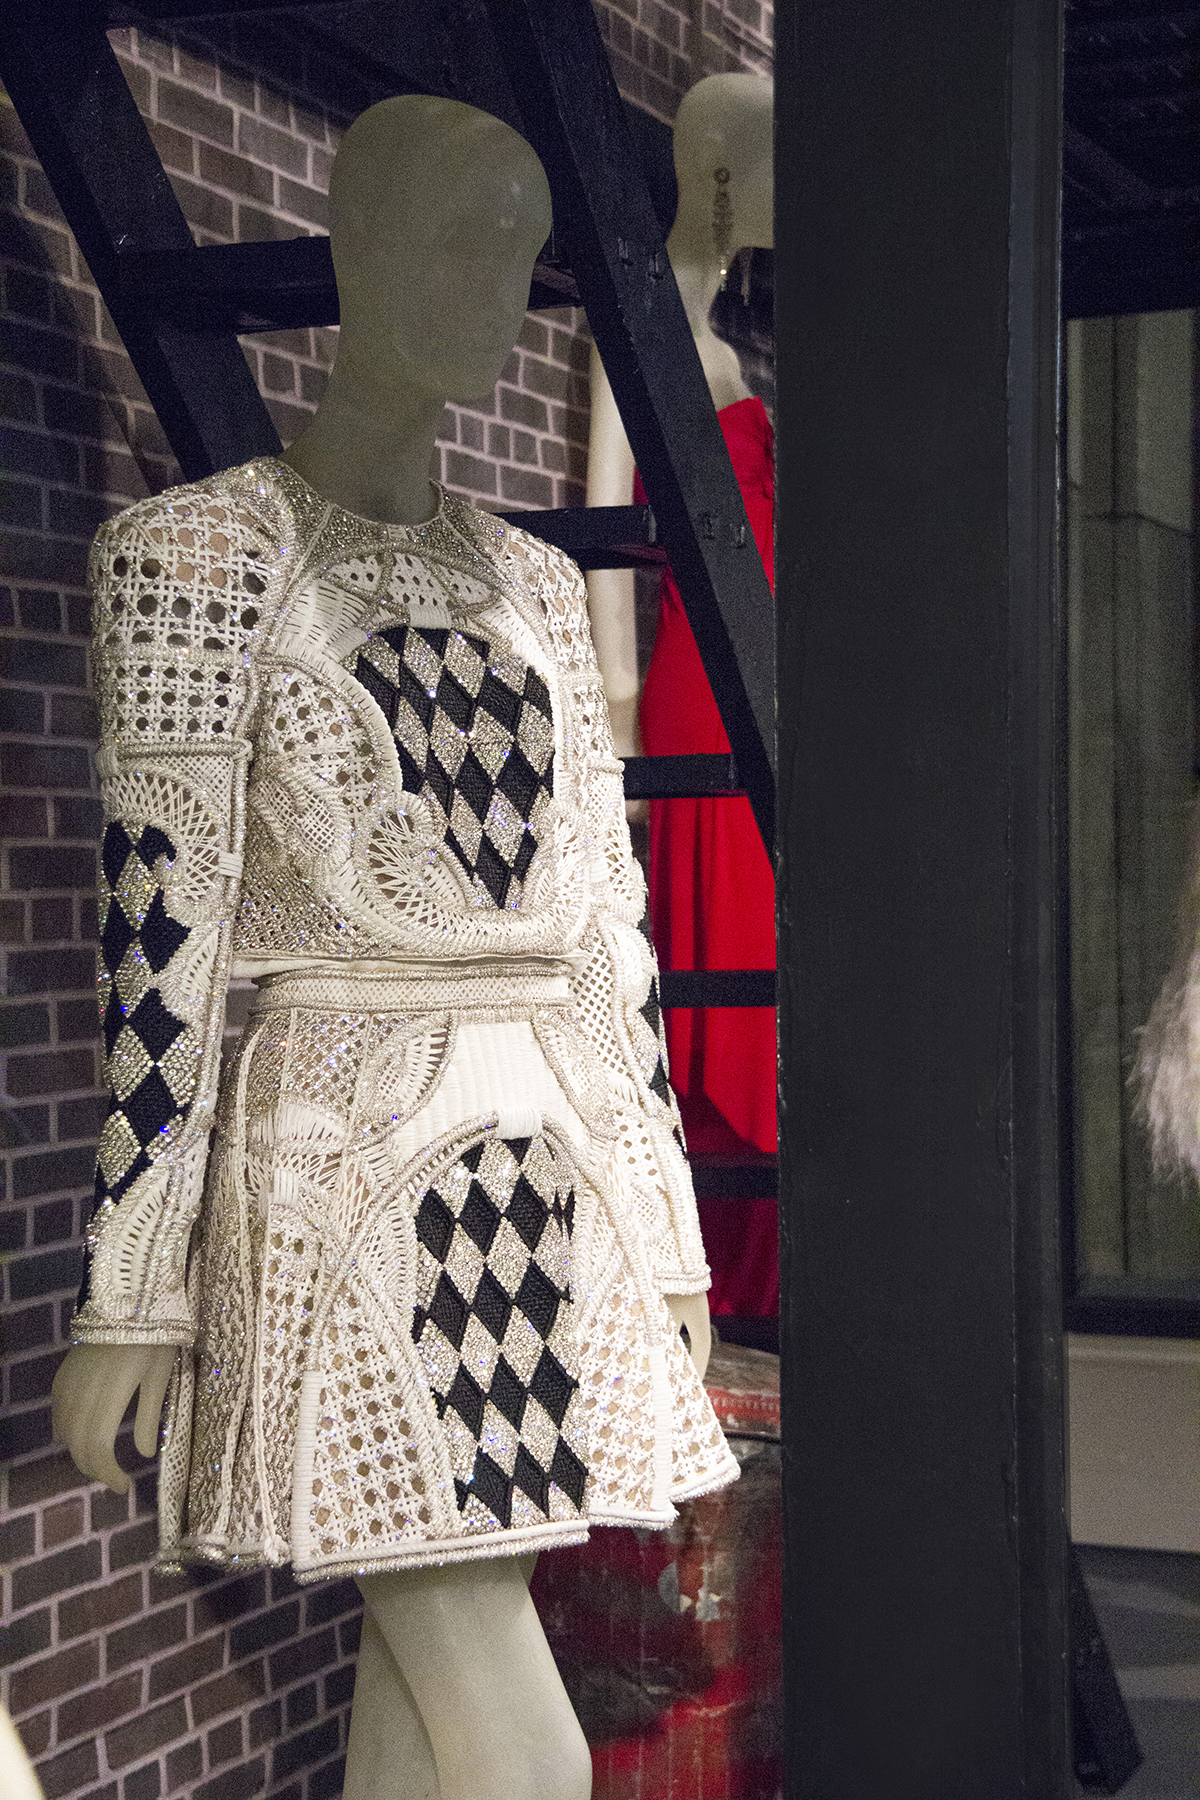 Costume Designer Tom Broecker selected this Balmain (SS13) black and white weave harlequin dress to be featured in the exhibit.